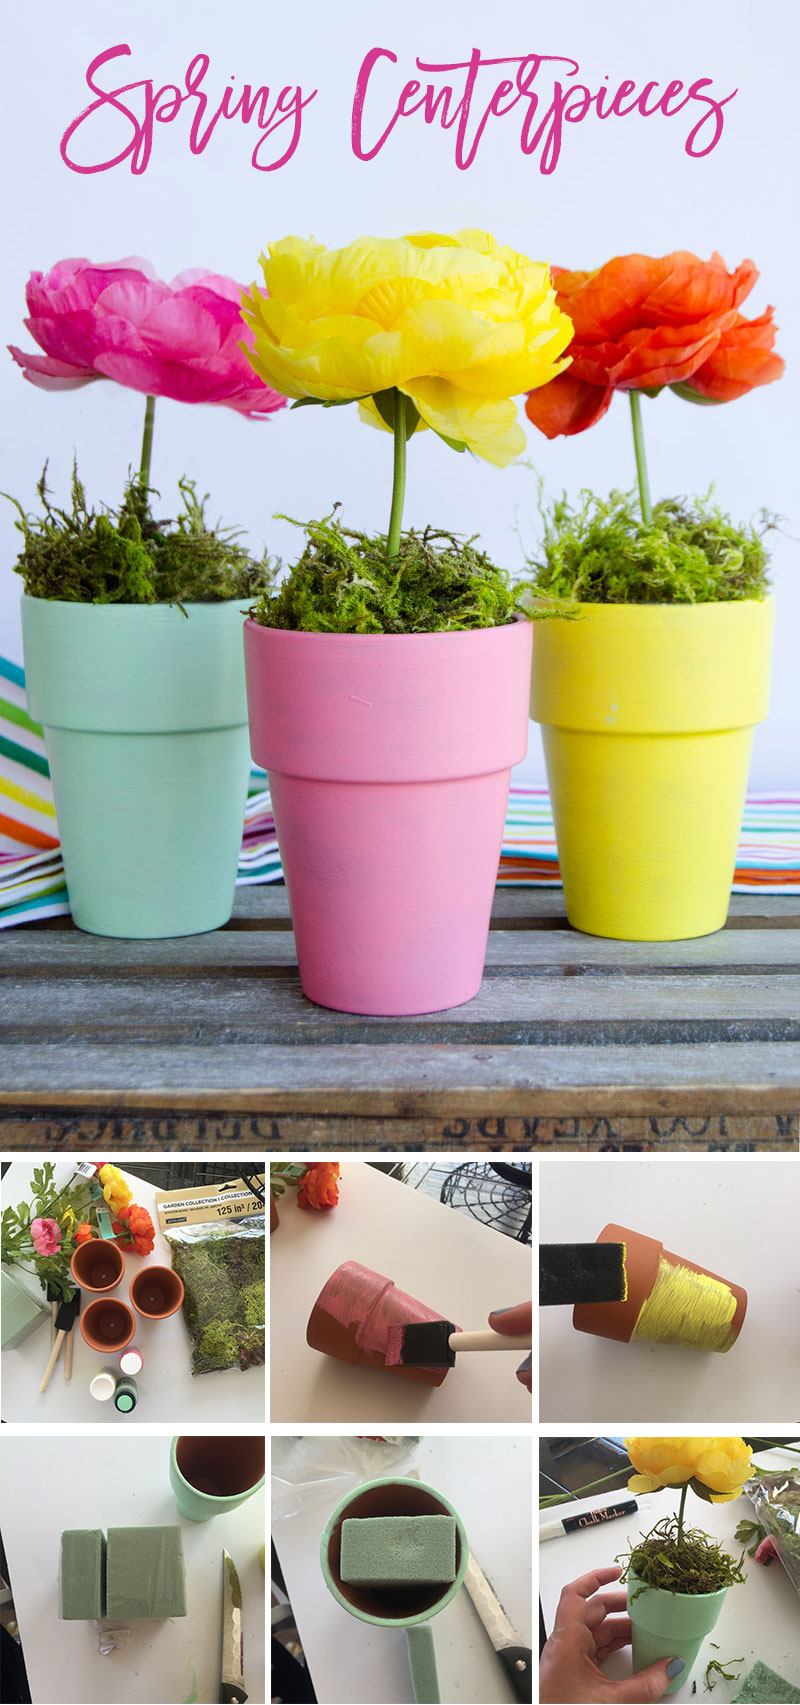 Flower Pot Craft & Centerpiece by Lindi Haws of Love The day